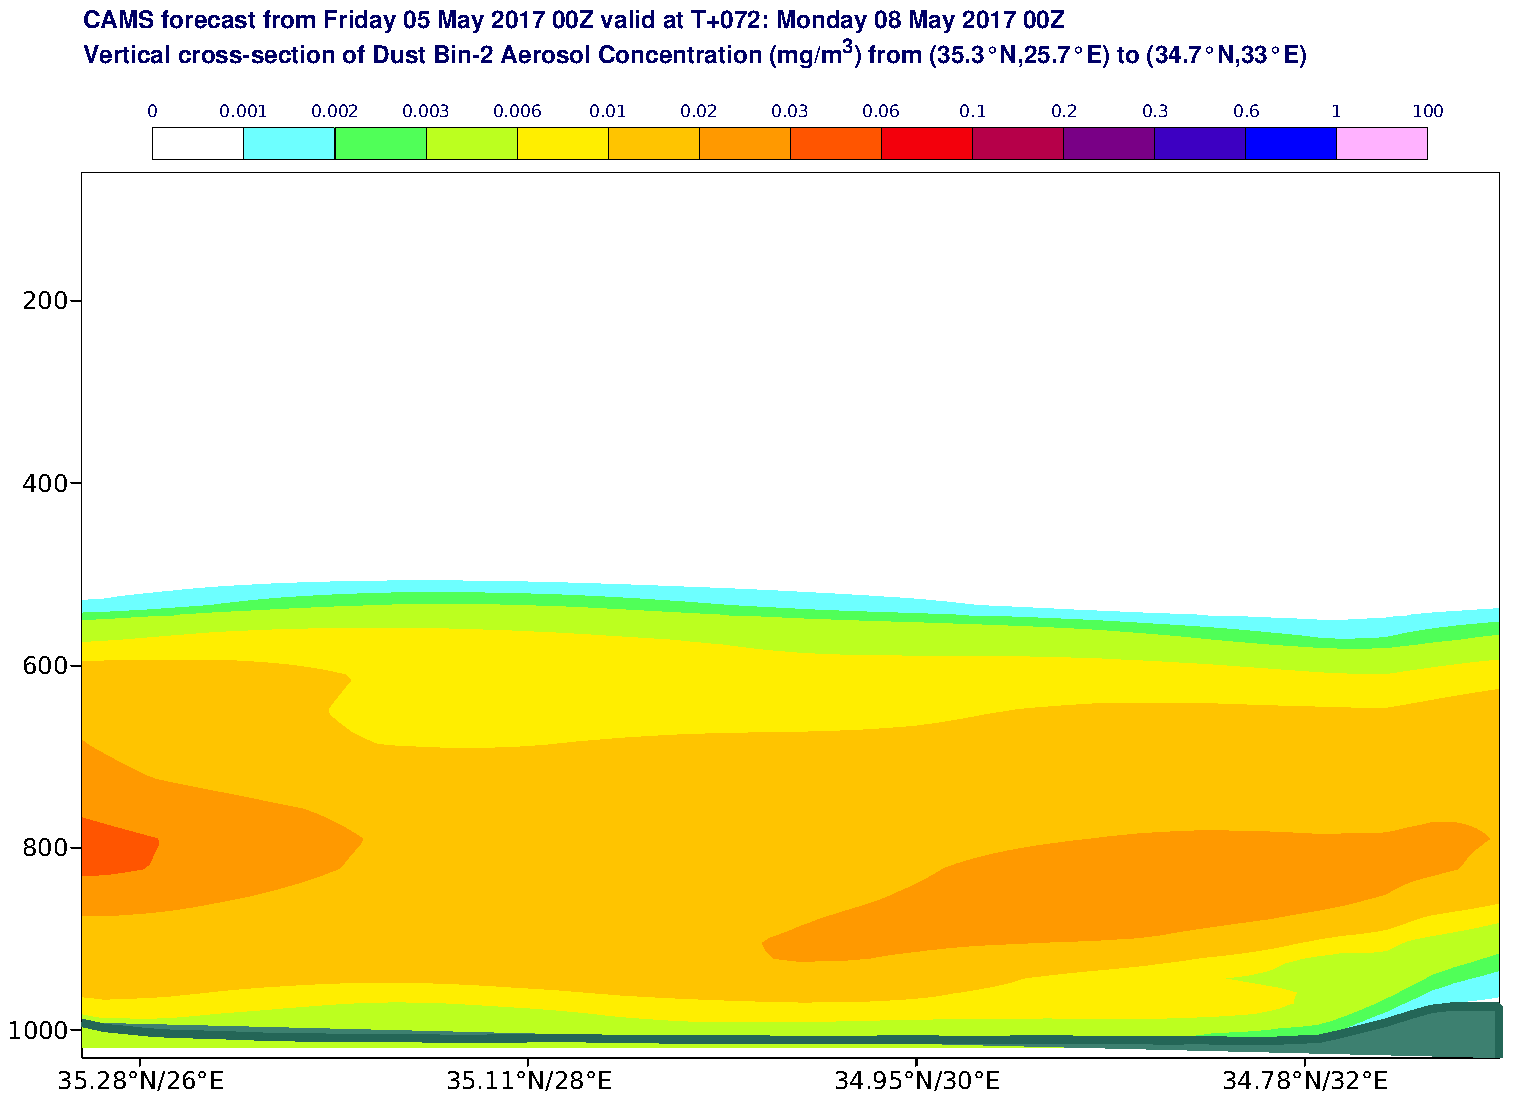 Vertical cross-section of Dust Bin-2 Aerosol Concentration (mg/m3) valid at T72 - 2017-05-08 00:00